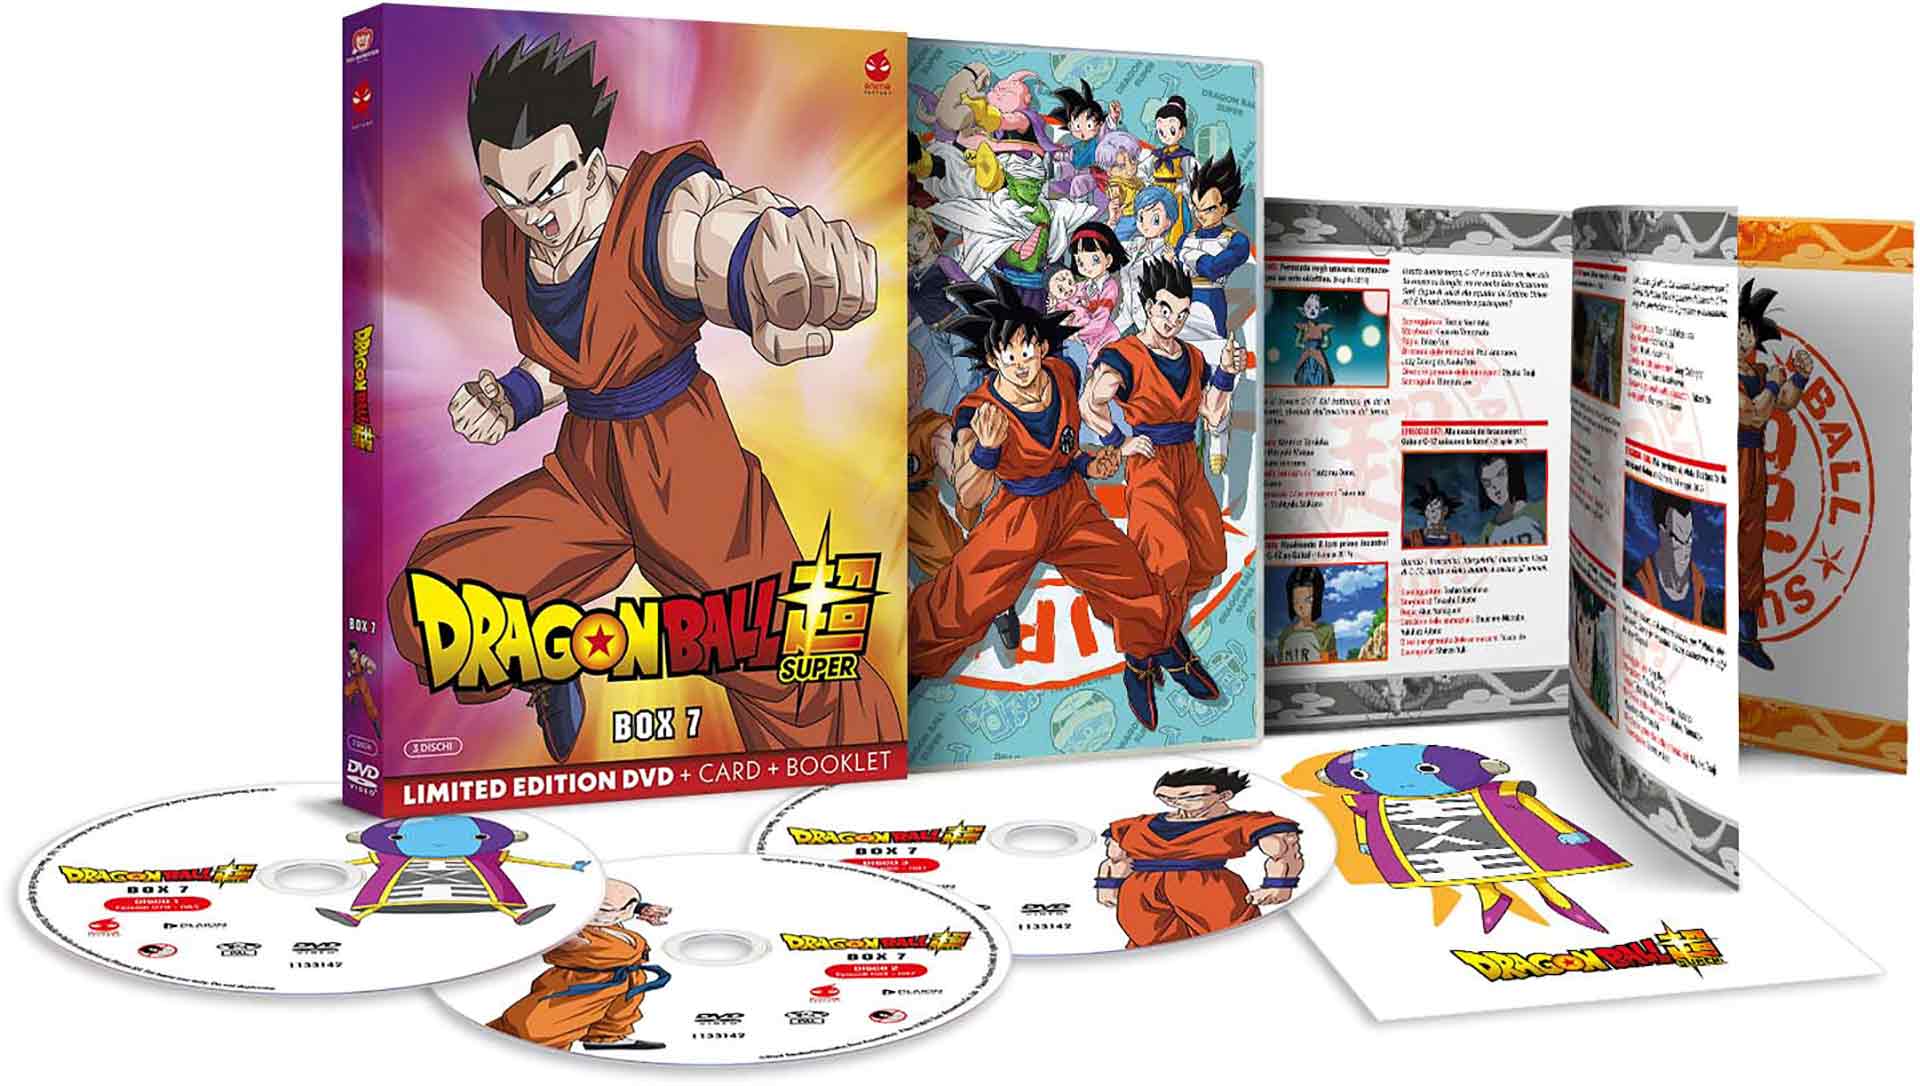 Dragon Ball Super - Volume 7 - Limited Edition 3 DVD + Card + Booklet (DVD) Image 2